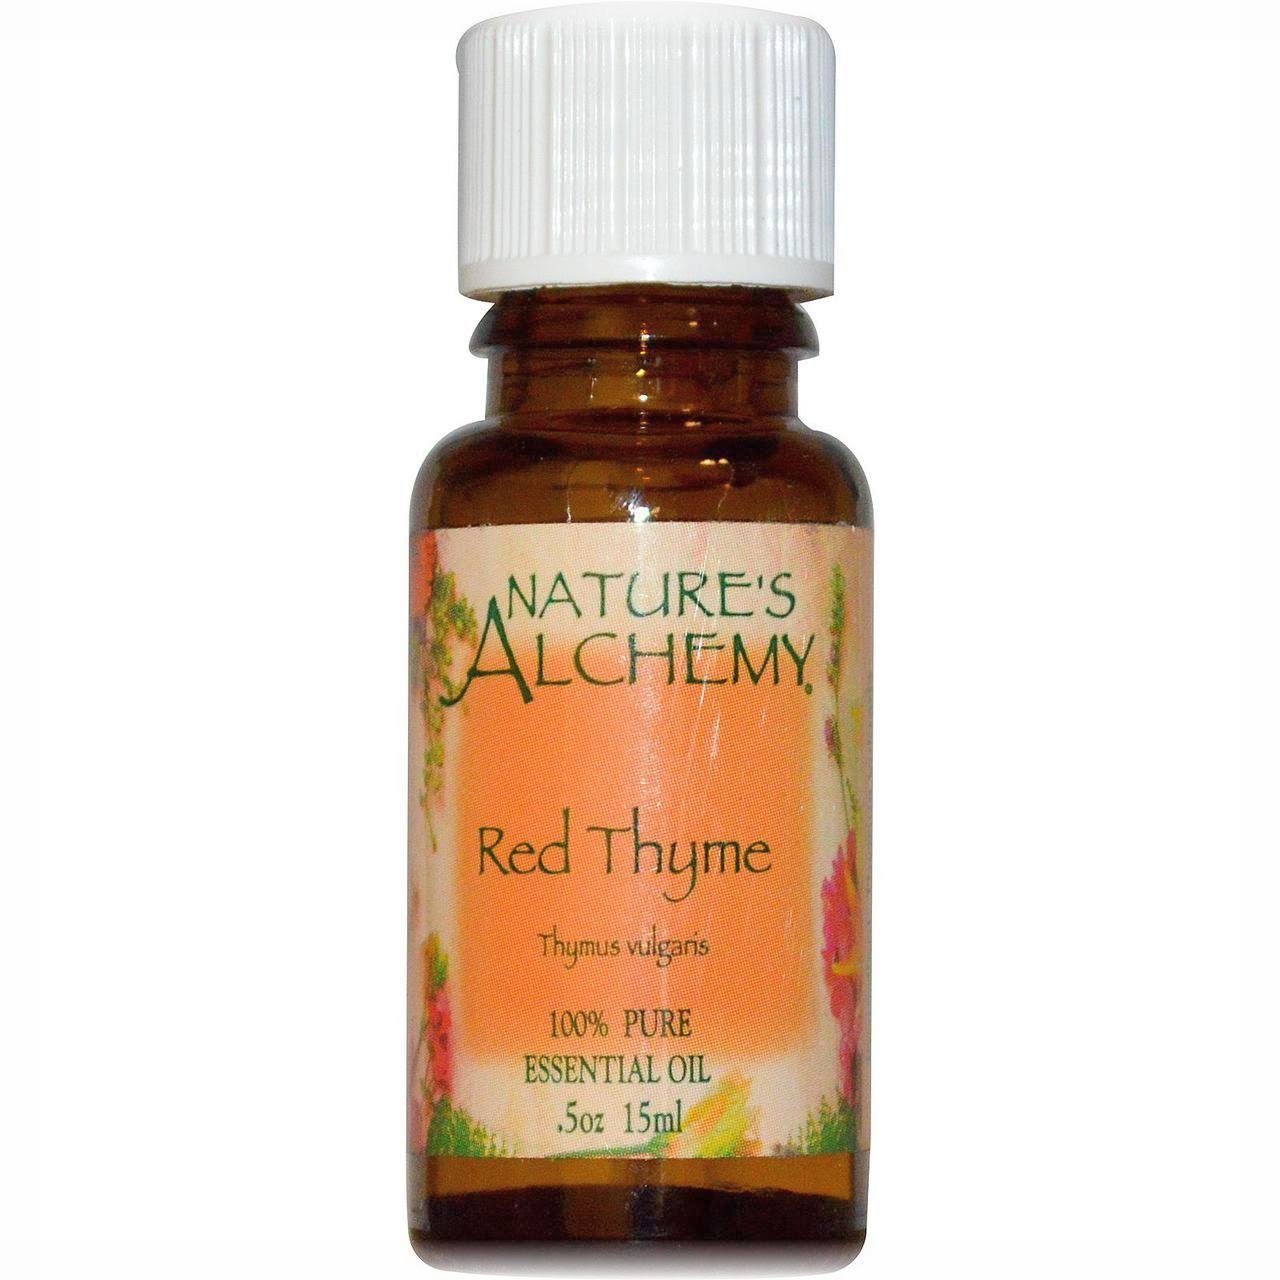 Nature's Alchemy 100% Pure Essential Oil - Red Thyme, 0.5oz